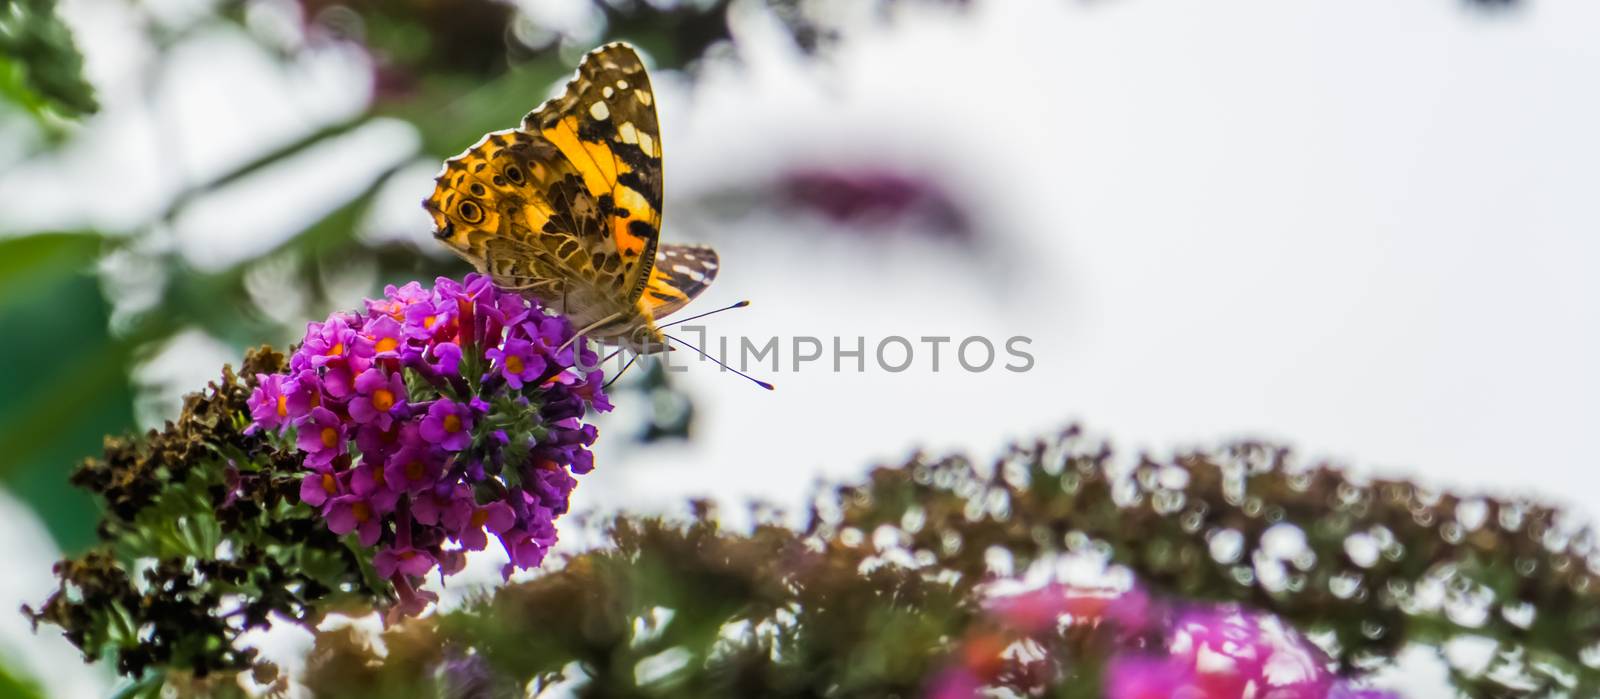 beautiful macro closeup of a painted lady butterfly, common cosmopolitan insect specie by charlottebleijenberg